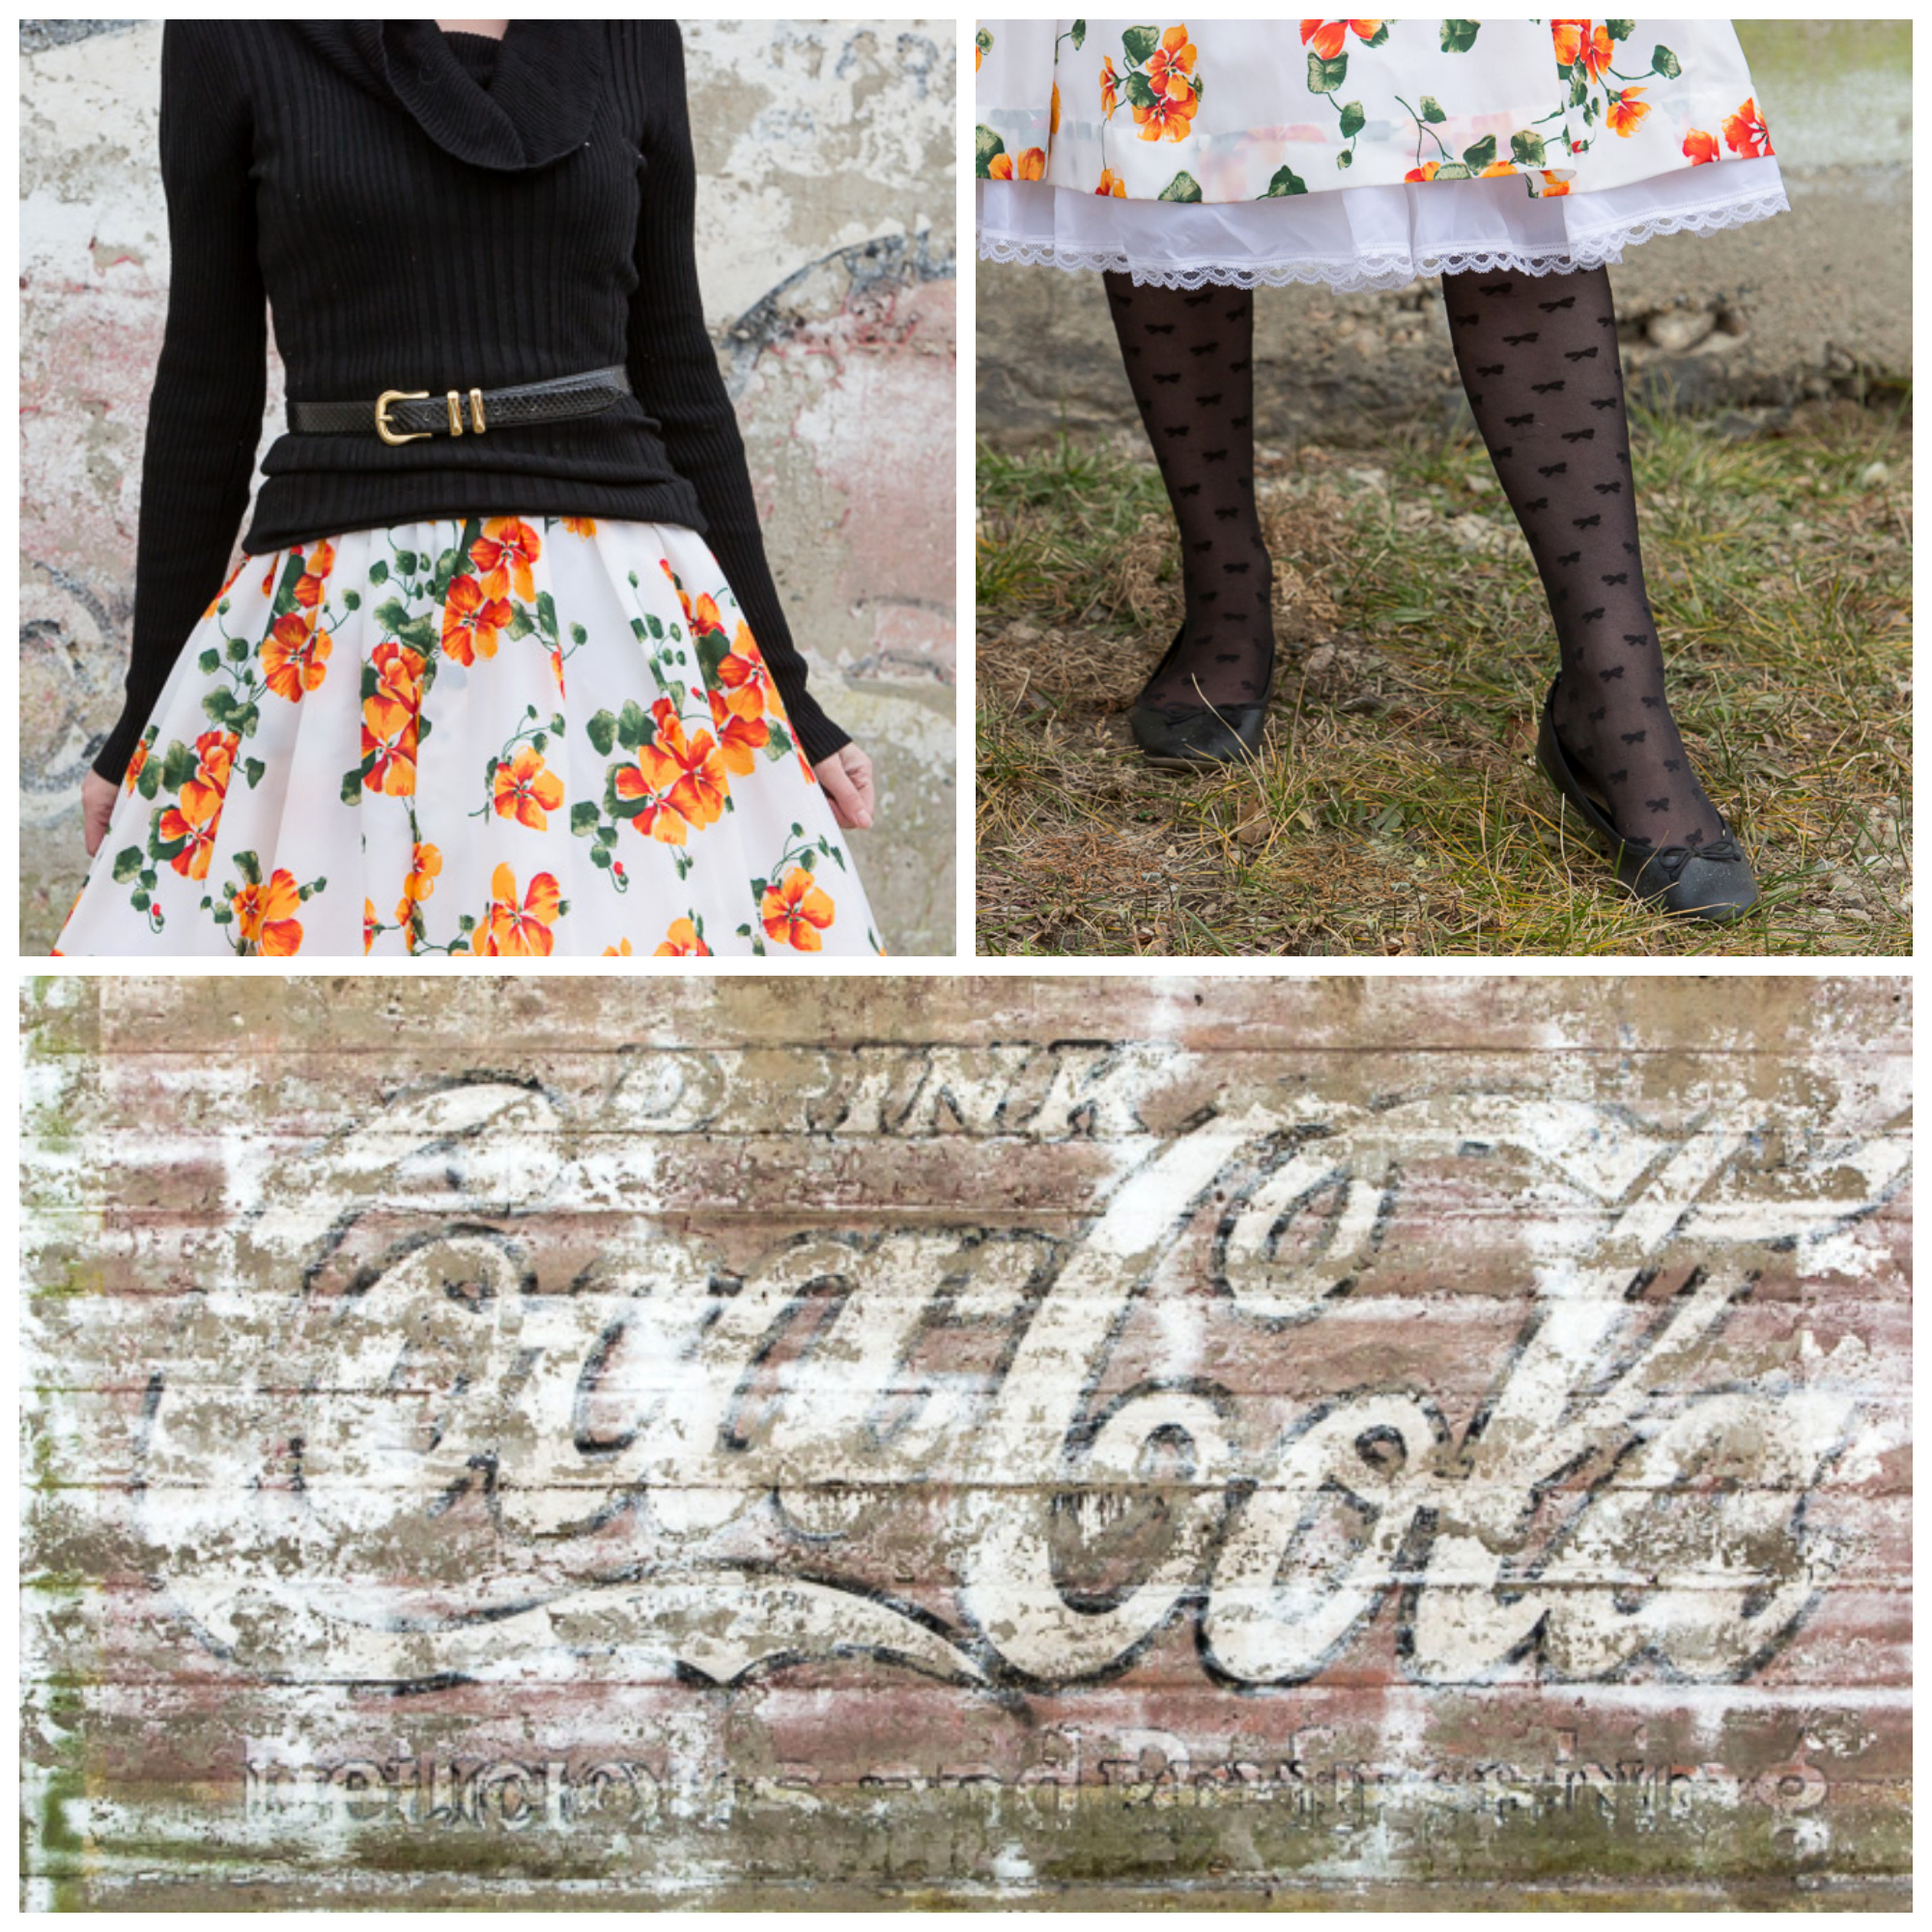 orange, floral, dress, floral dress, petticoat, vintage, mural, winter outfit, montana, wyoming, 